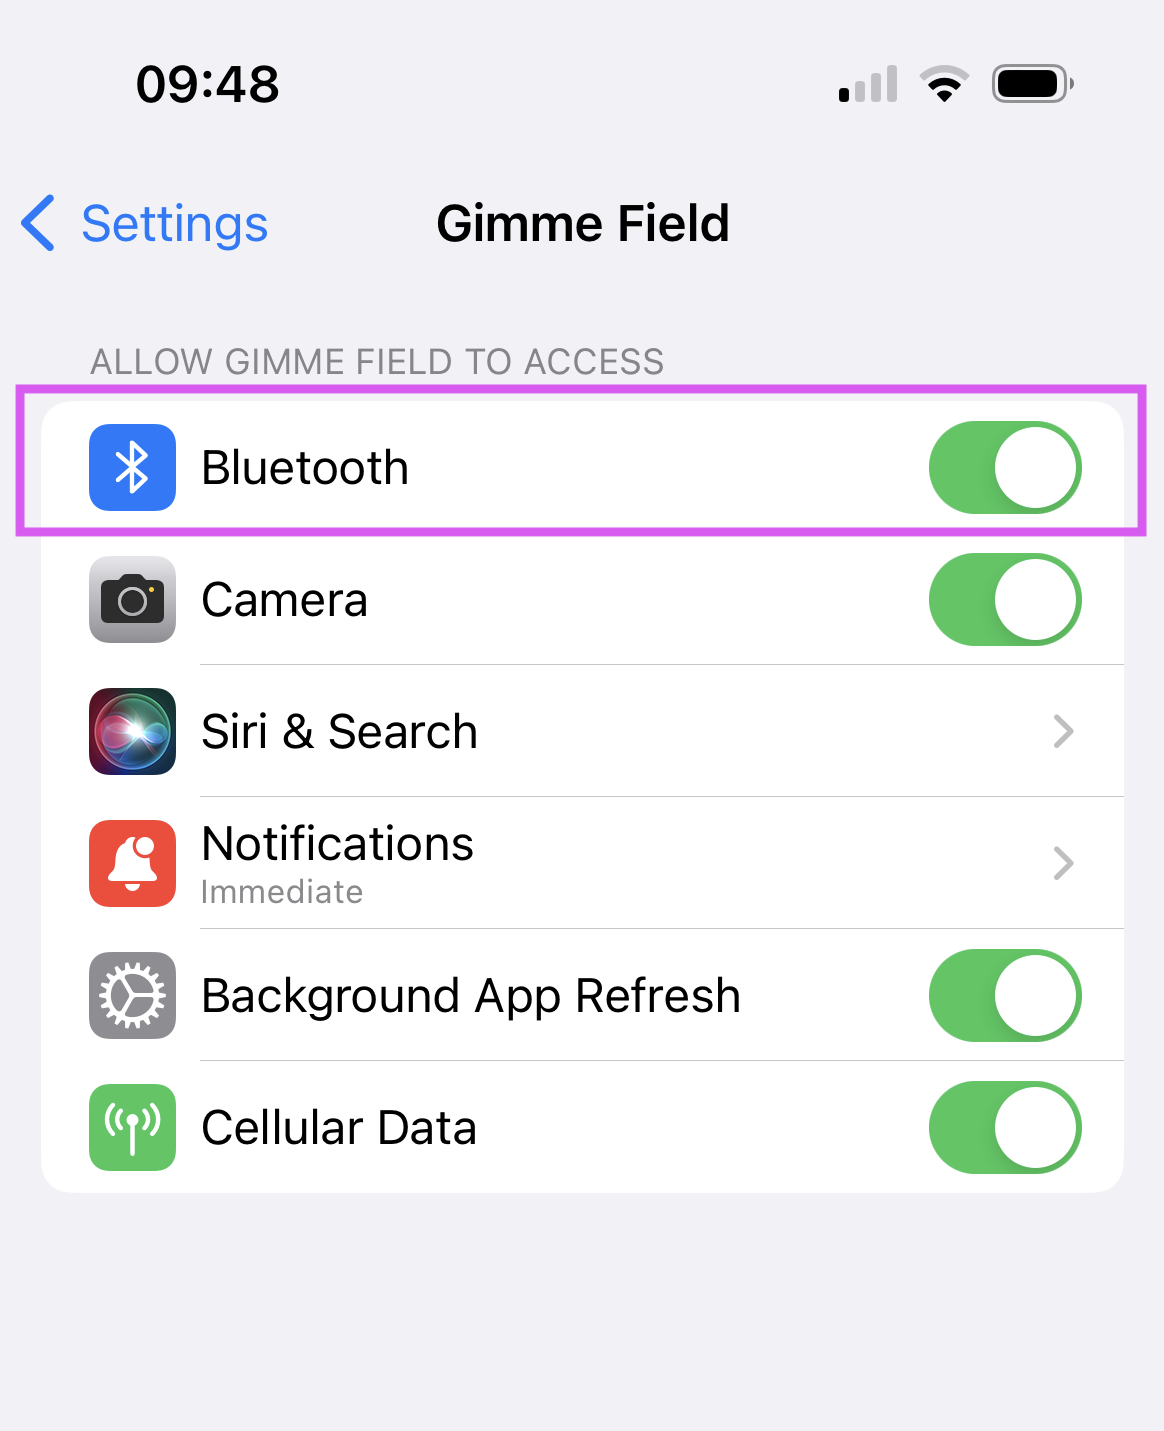 Gimme_Field_app_permissions.PNG